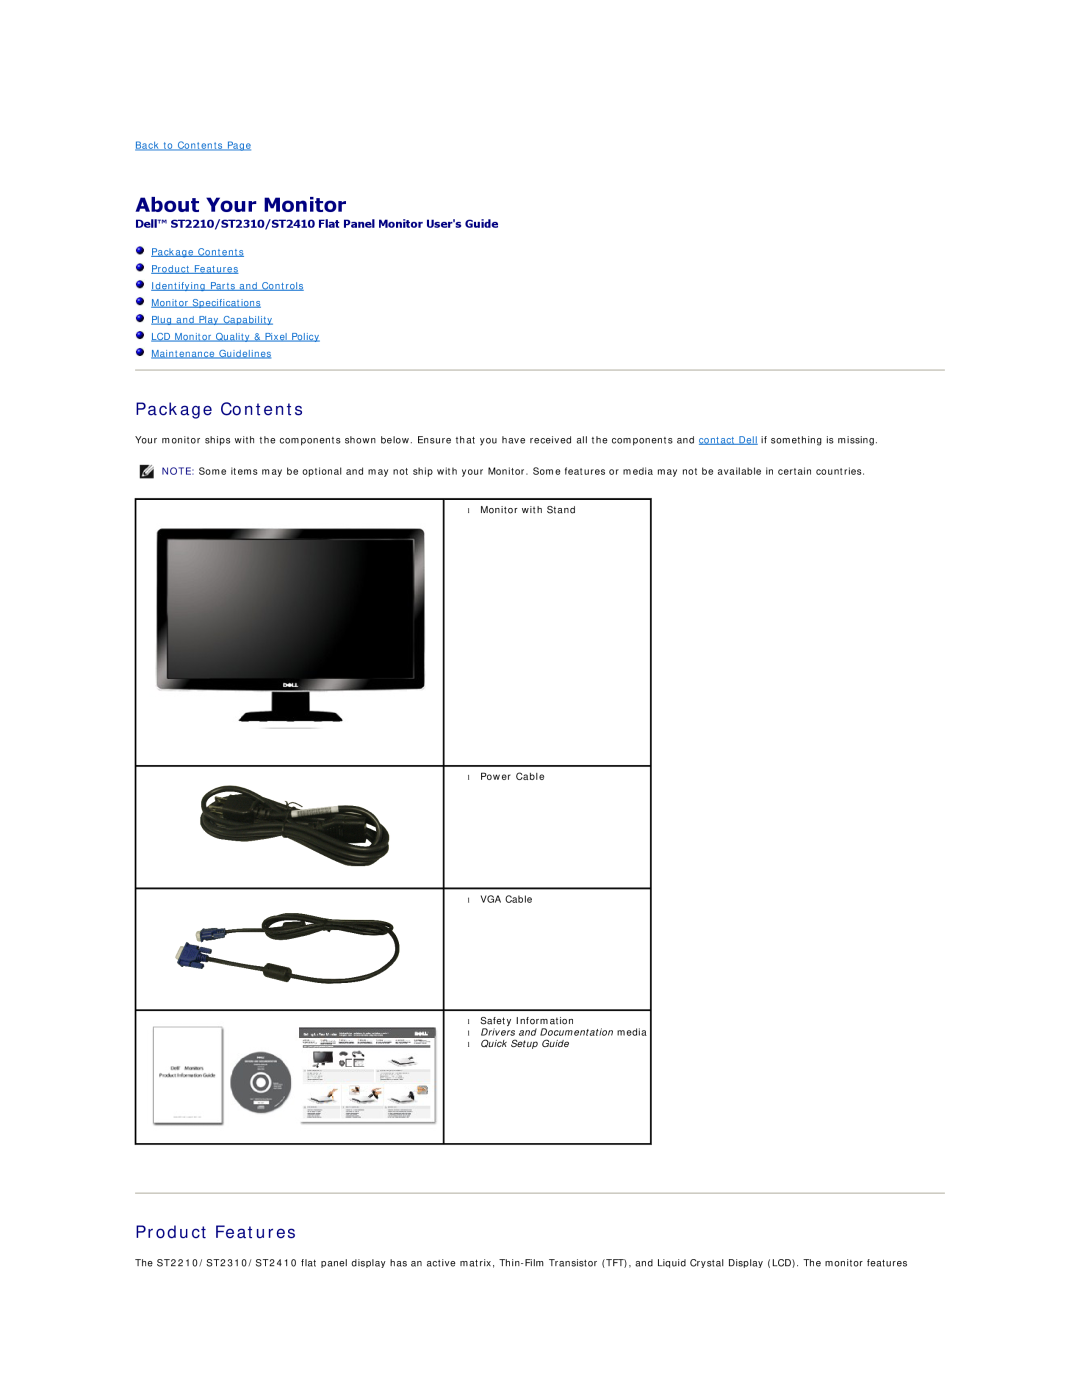 Dell ST2310, ST2410, ST2210 appendix About Your Monitor, Package Contents, Product Features, Back to Contents Page 